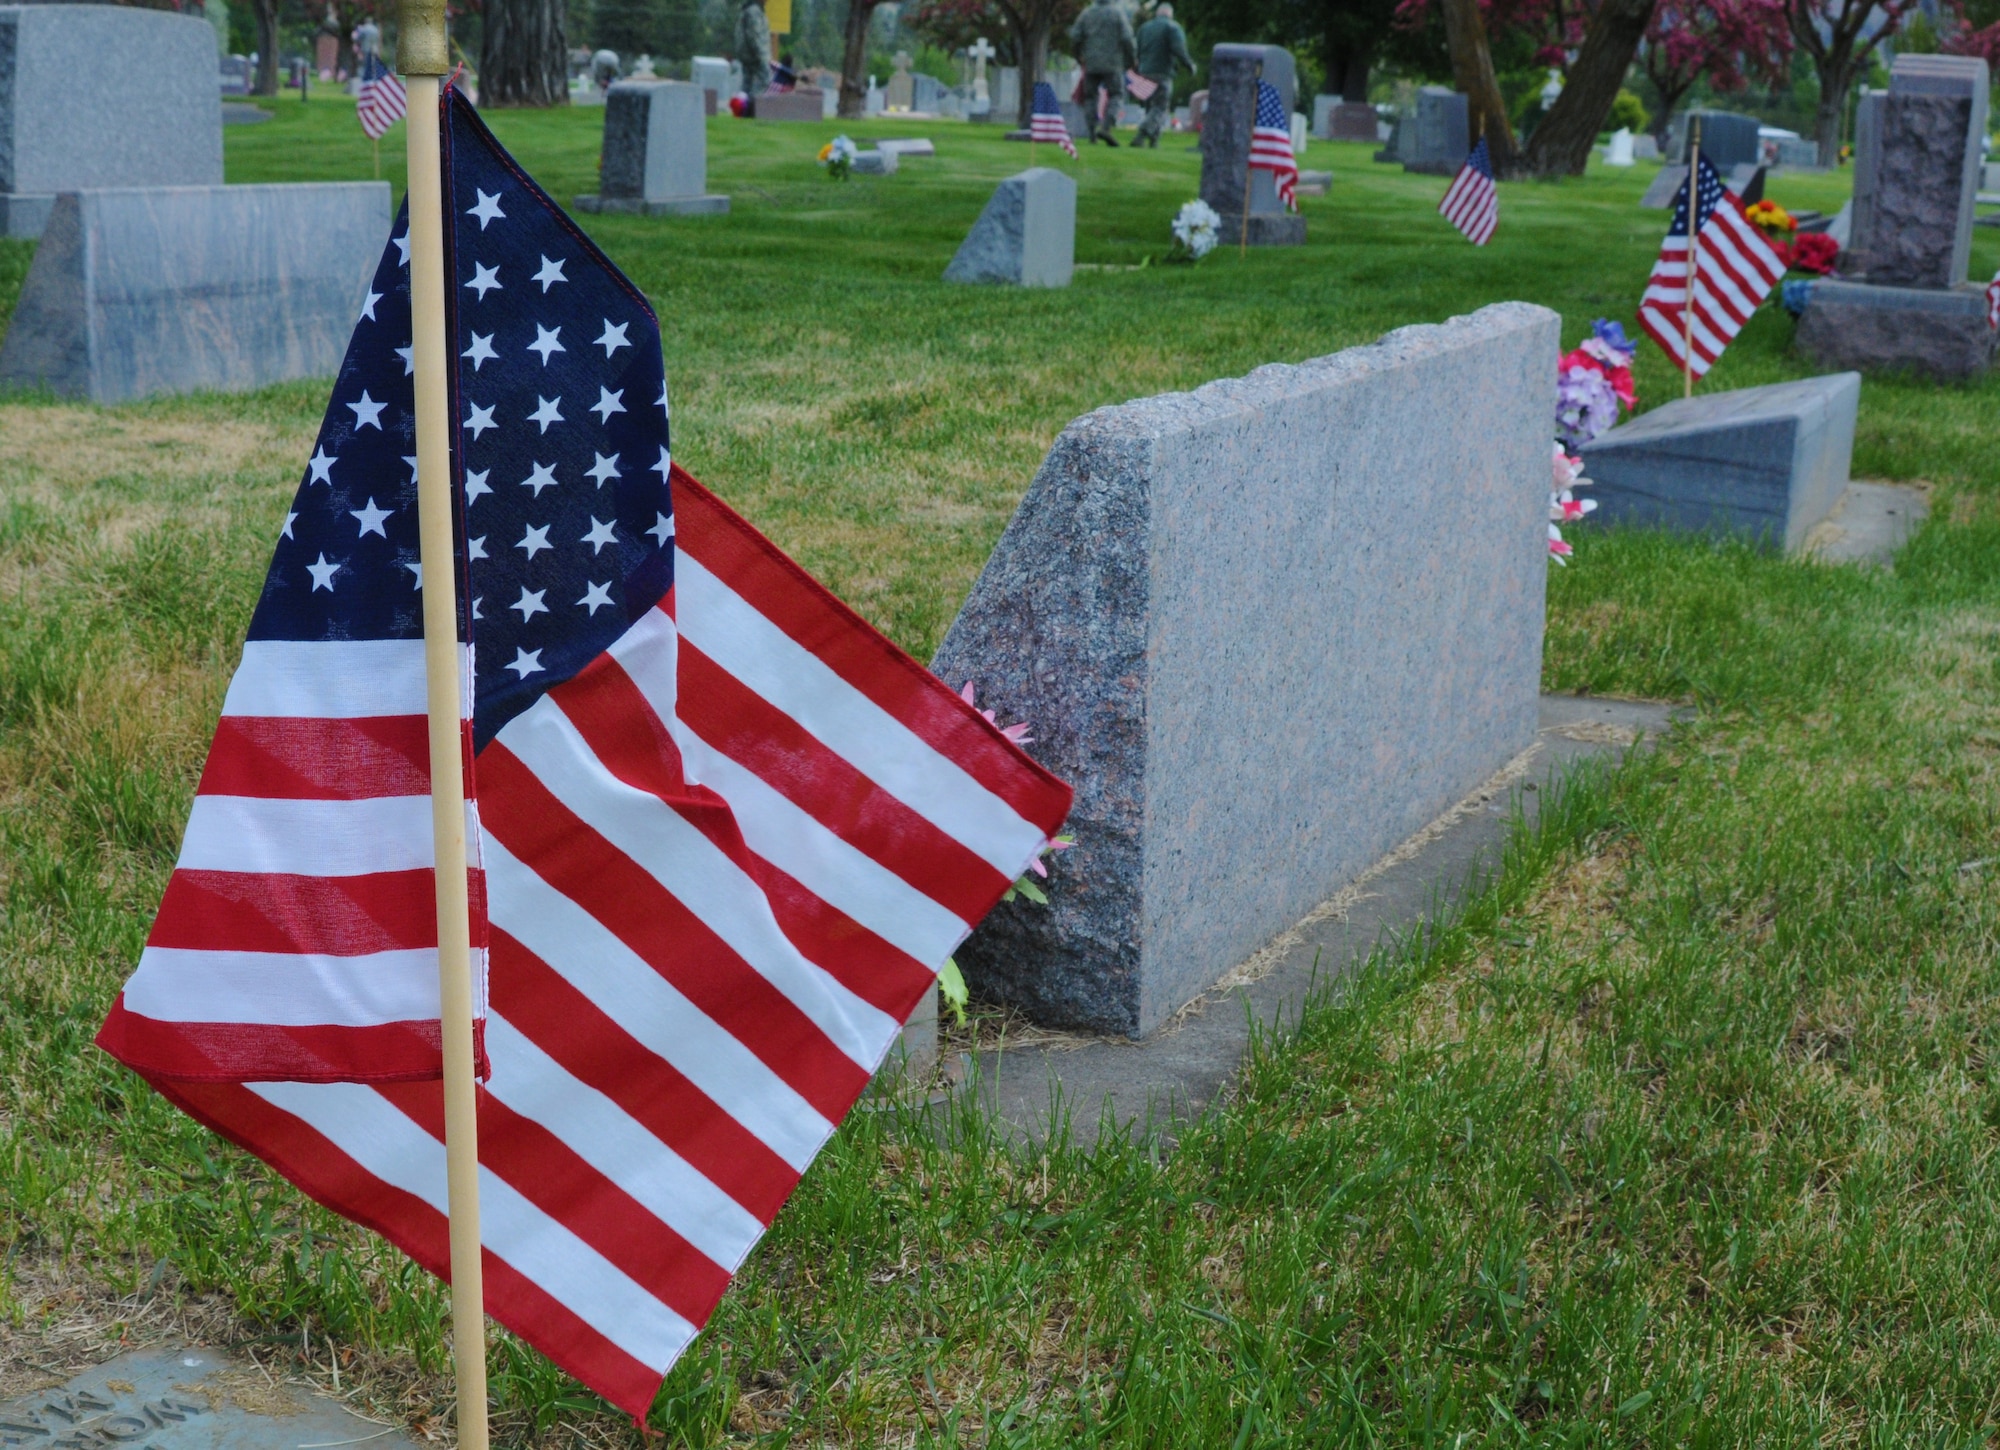 U.S. flags decorate the graves of local veterans at Mount Calvary Cemetery in Klamath Falls, Ore. May 23, 2013.  Airman from the 173rd Fighter Wing spent their morning placing flags in honor of Memorial Day.  (U.S. Air National Guard photo by Master Sgt. Jennifer Shirar) RELEASED  